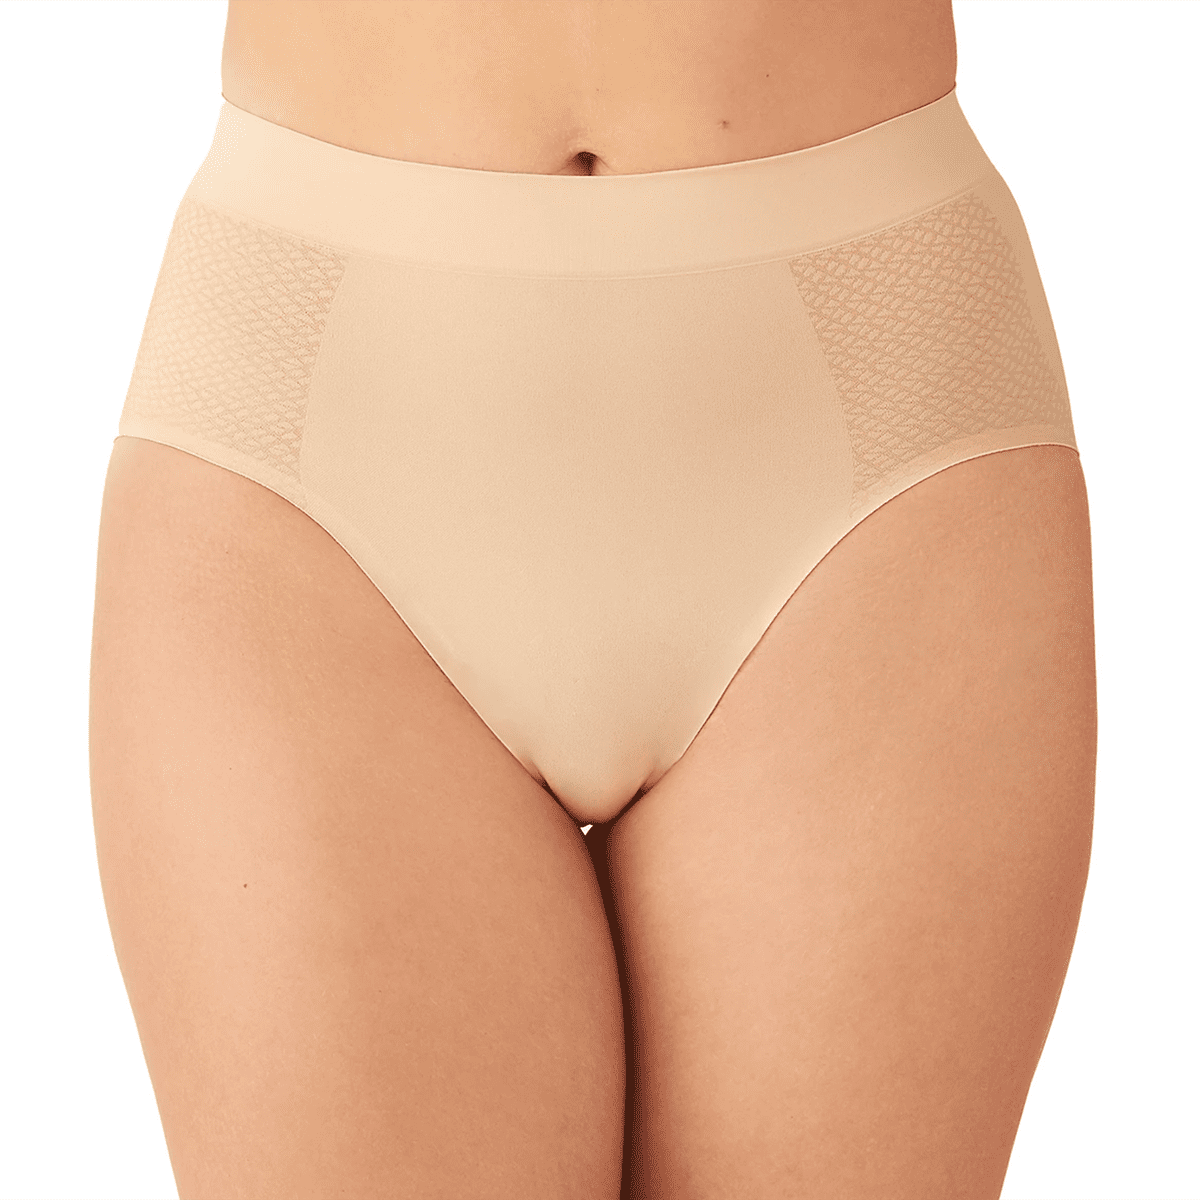 NEARLY NUDE Women Hi Cut Brief Set of 3 Large 